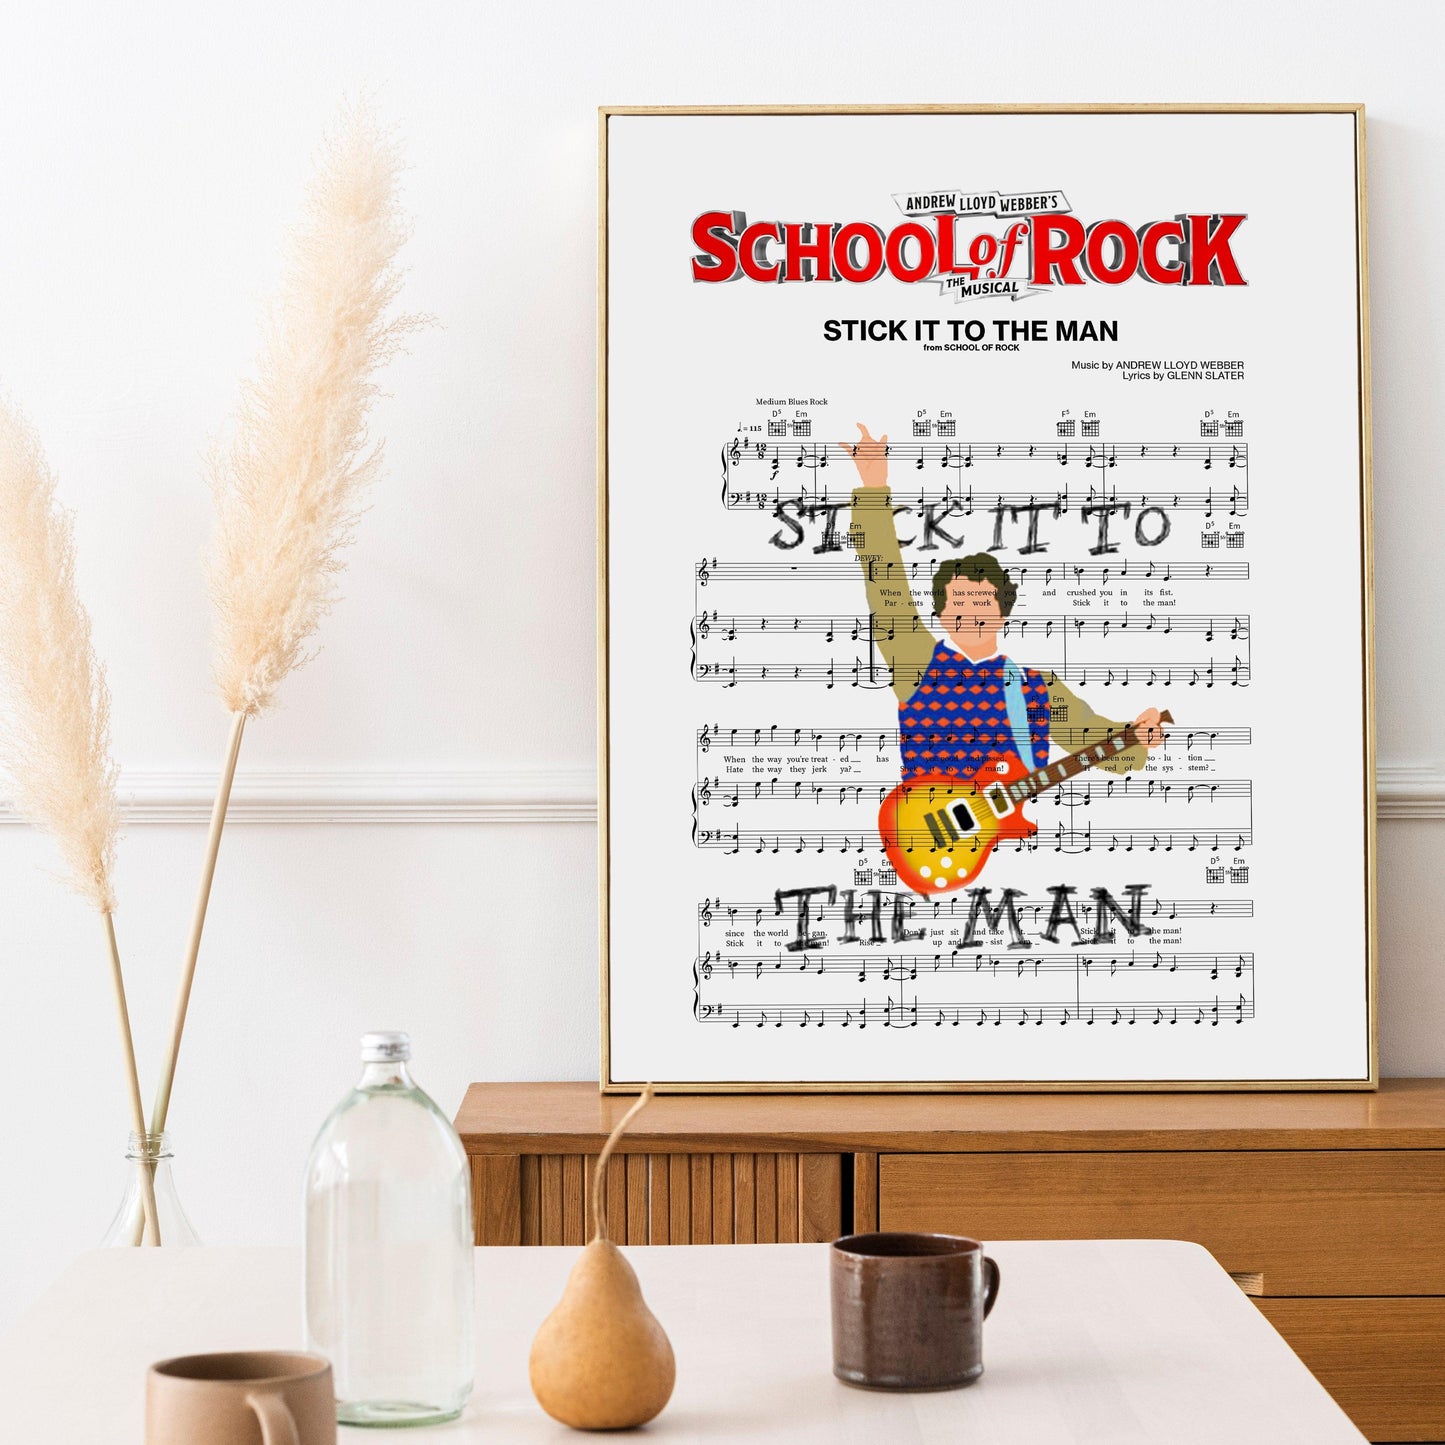 The School of Rock - STICK IT TO THE MAN Poster is the perfect way to show your love for rock music. This simple design is printed on high-quality paper, making it ideal for decorating your kitchen or dining room. With free delivery, this poster is a great way to show your rockin' style.